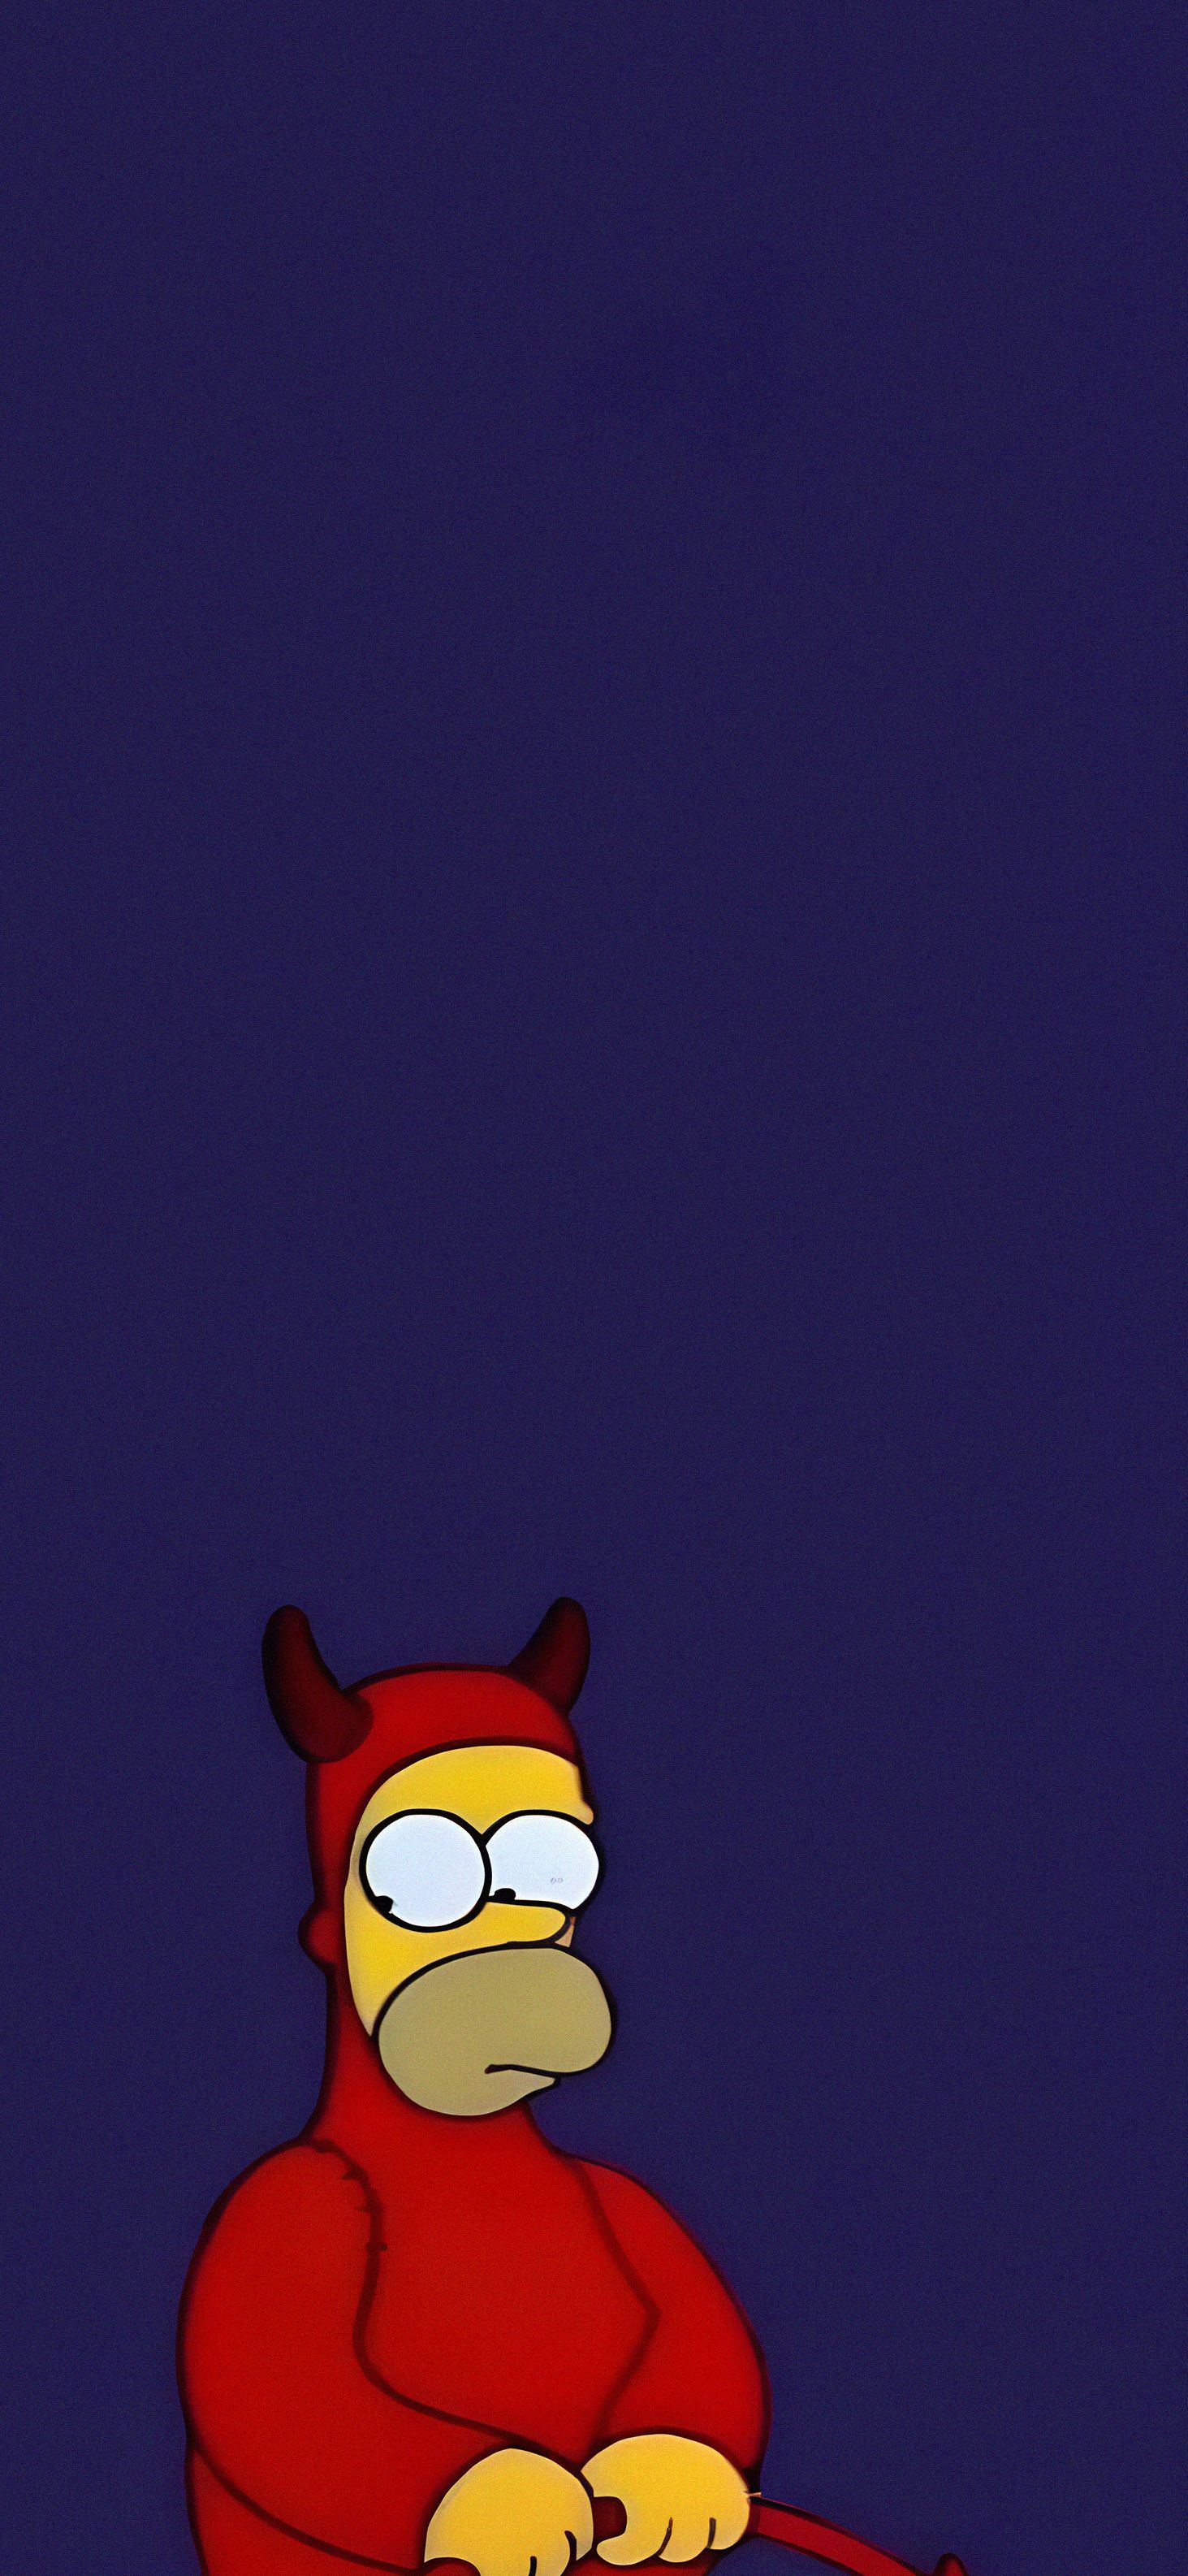 Iphone wallpaper of Homer Simpson as the devil from the Simpsons - Homer Simpson